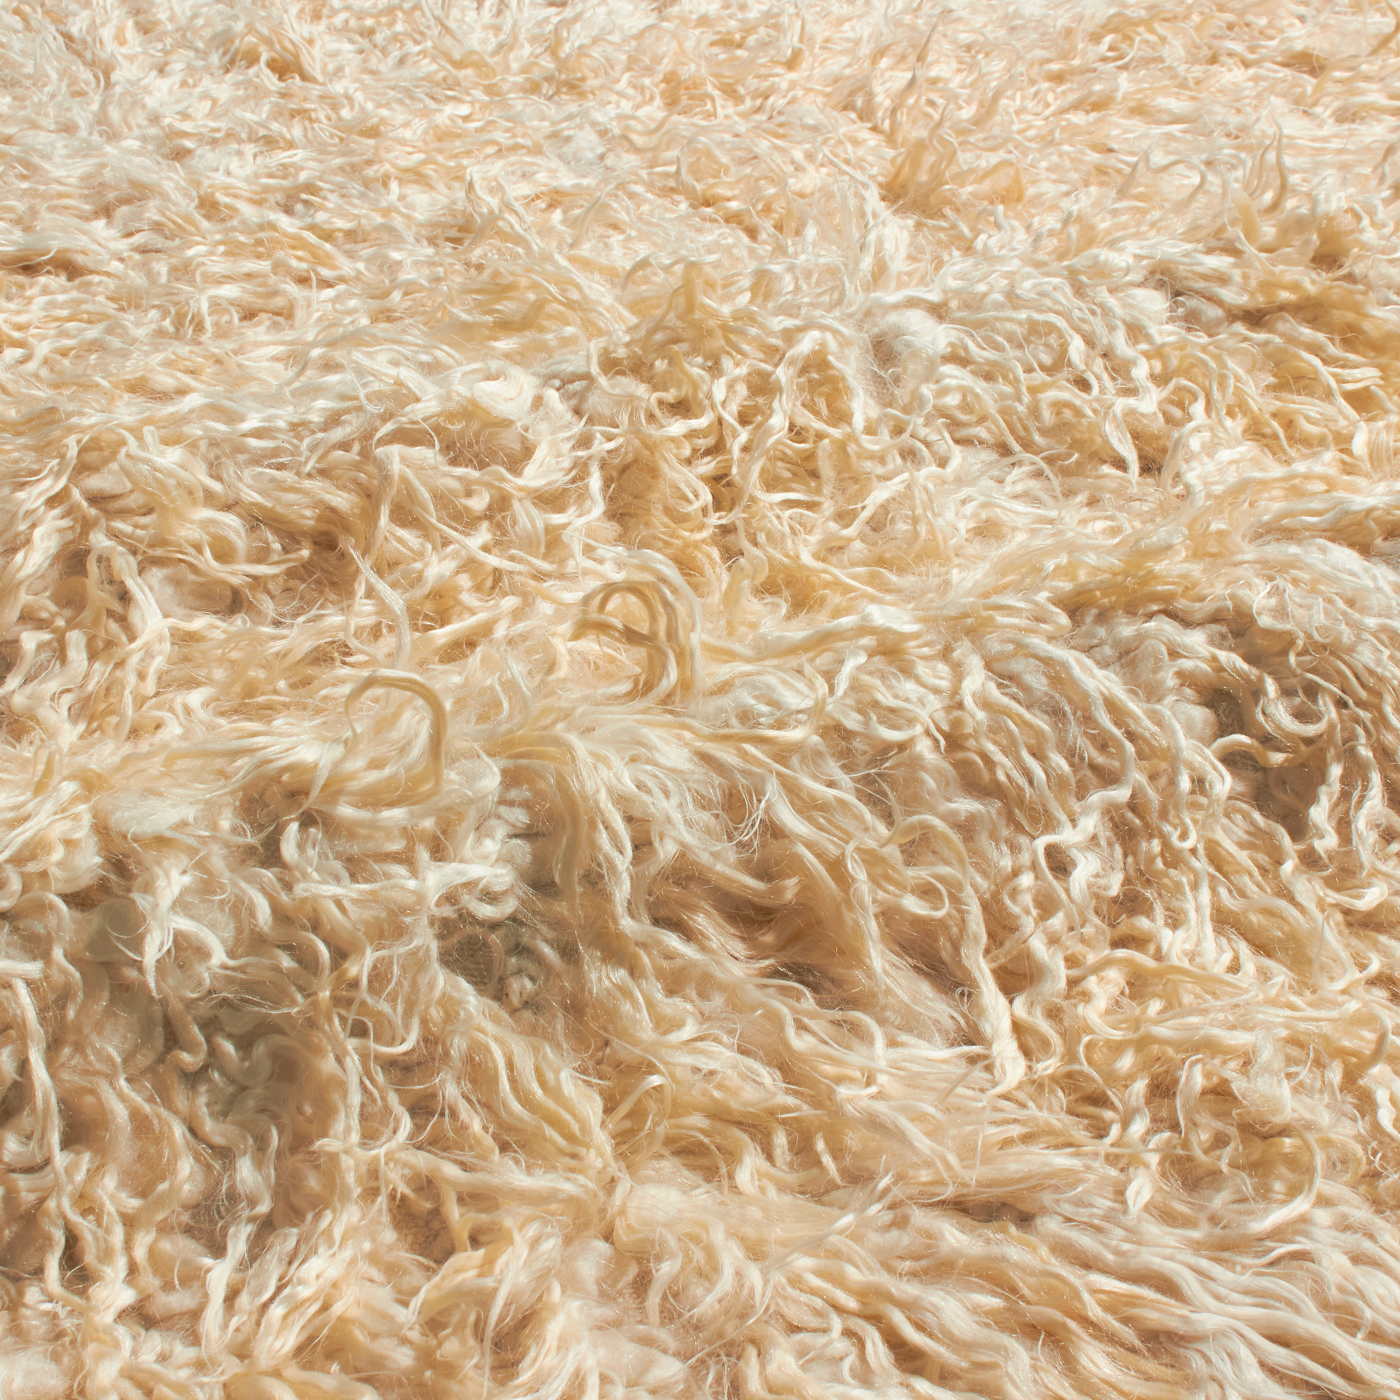 Tulu rugs (pronounced “two-lou”) are thick shaggy silky modern/tribal rugs.